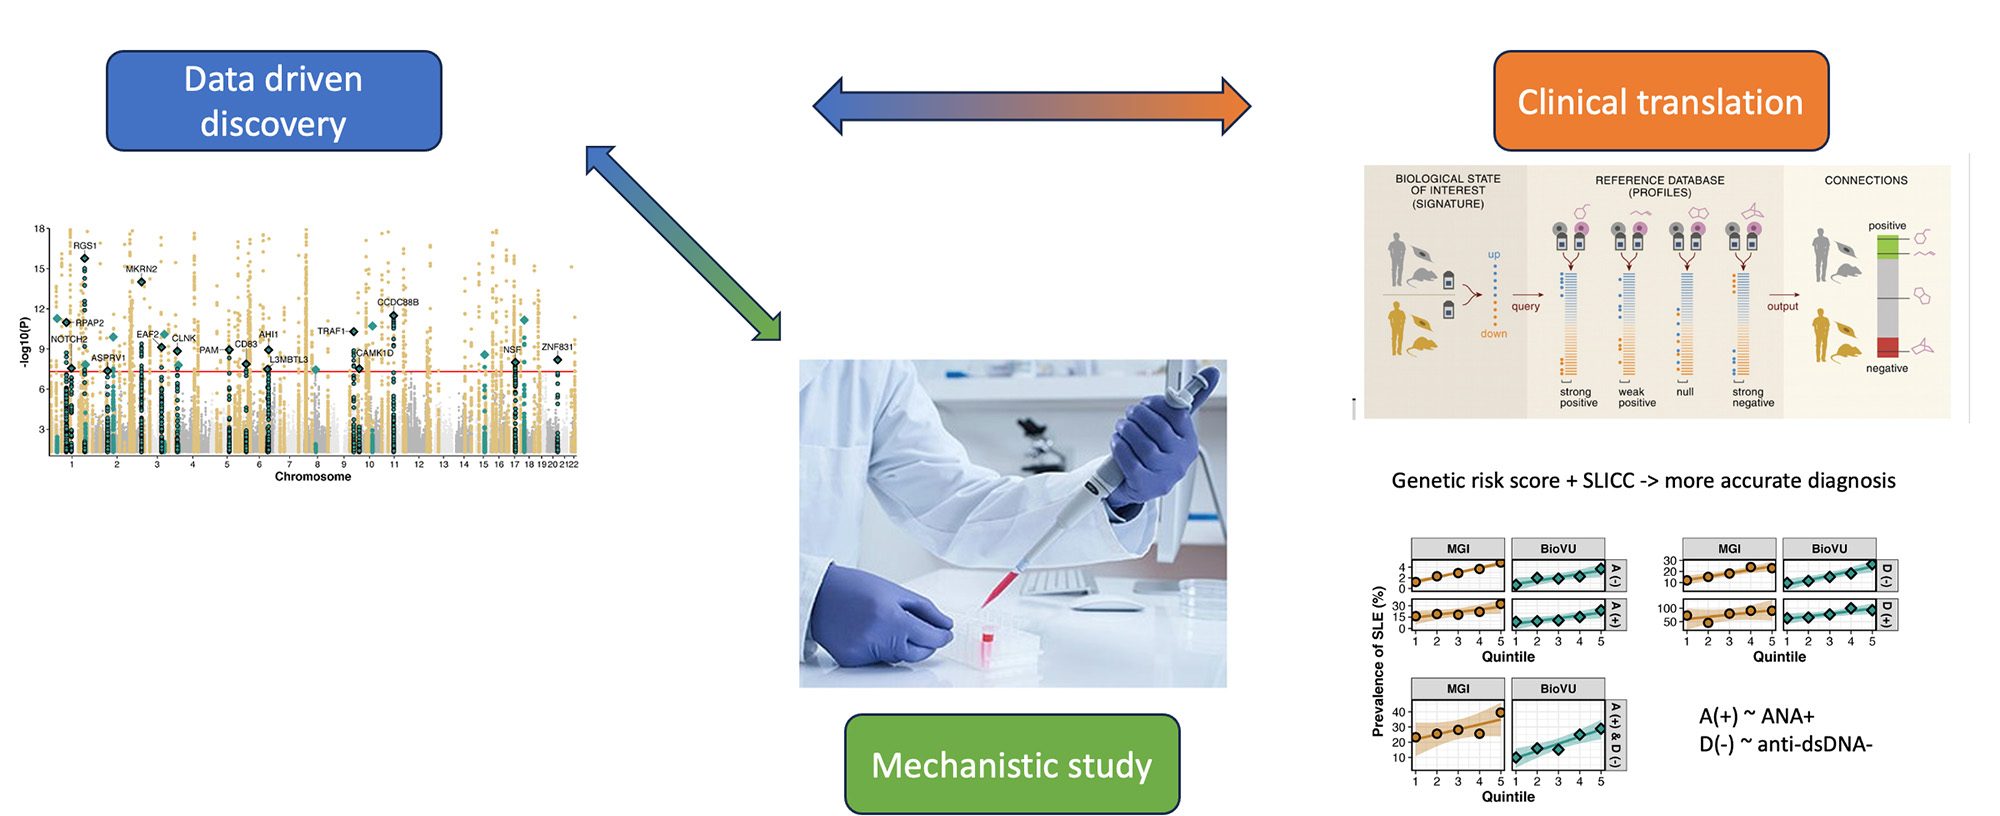 Data driven discovery with arrows between it and Clinical translation and Mechanistic study, with images used for decorative purposes